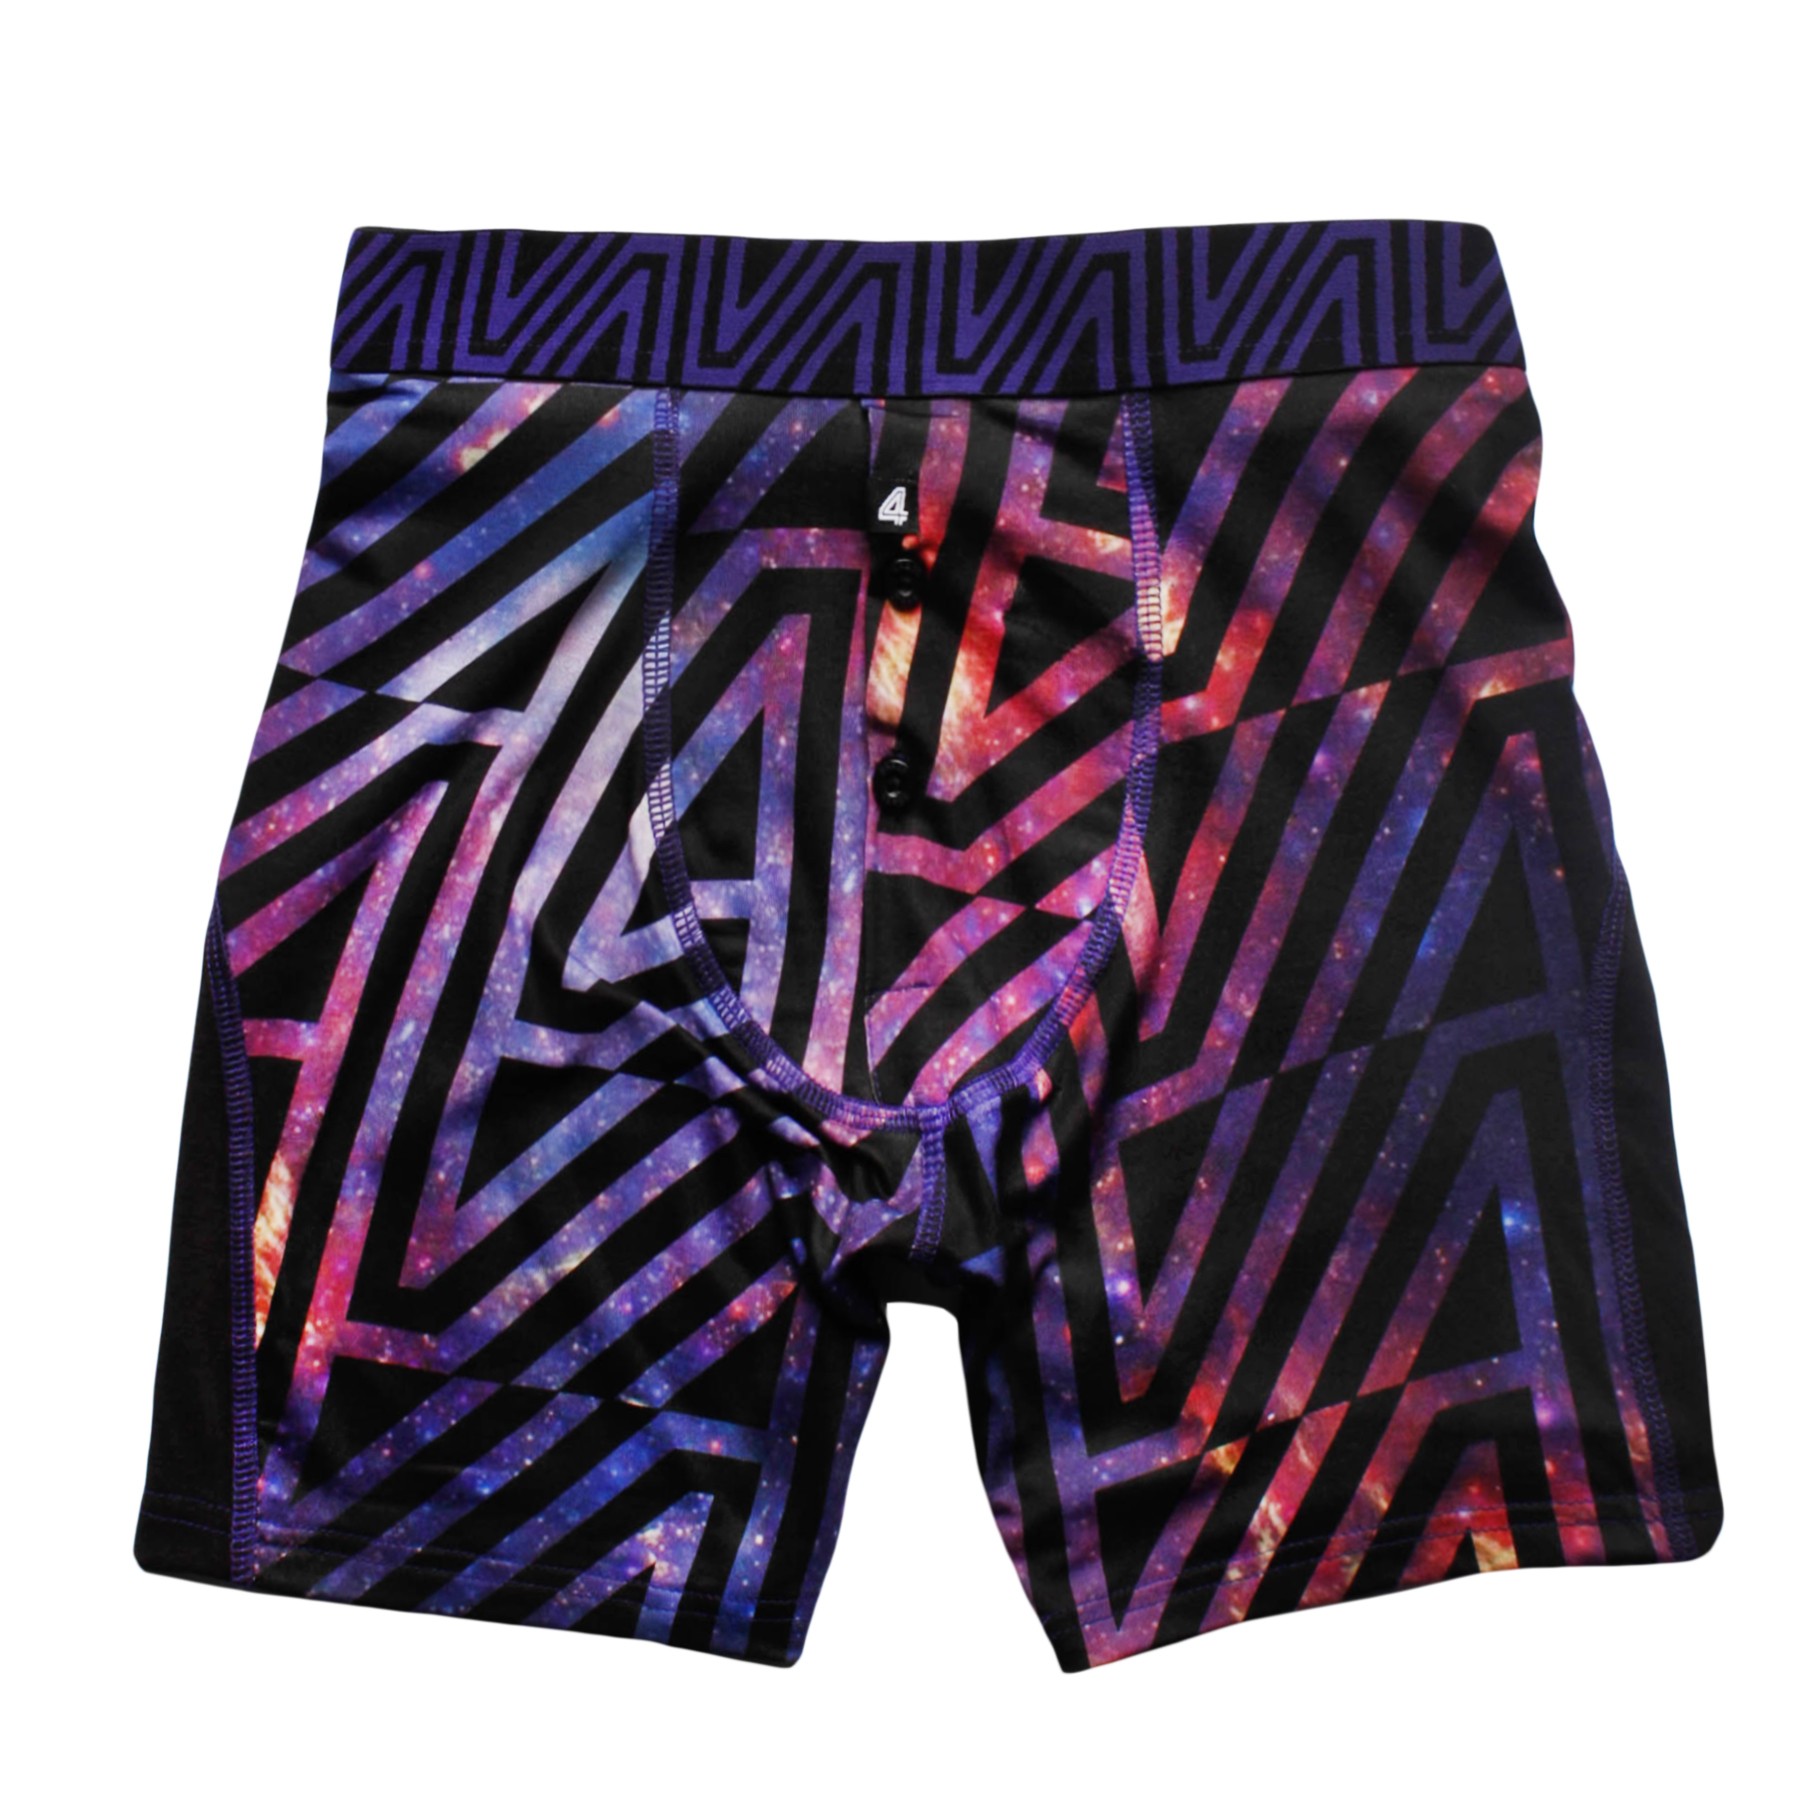 DeluxeComfort.com 4 zag Galaxy Fitted Boxers